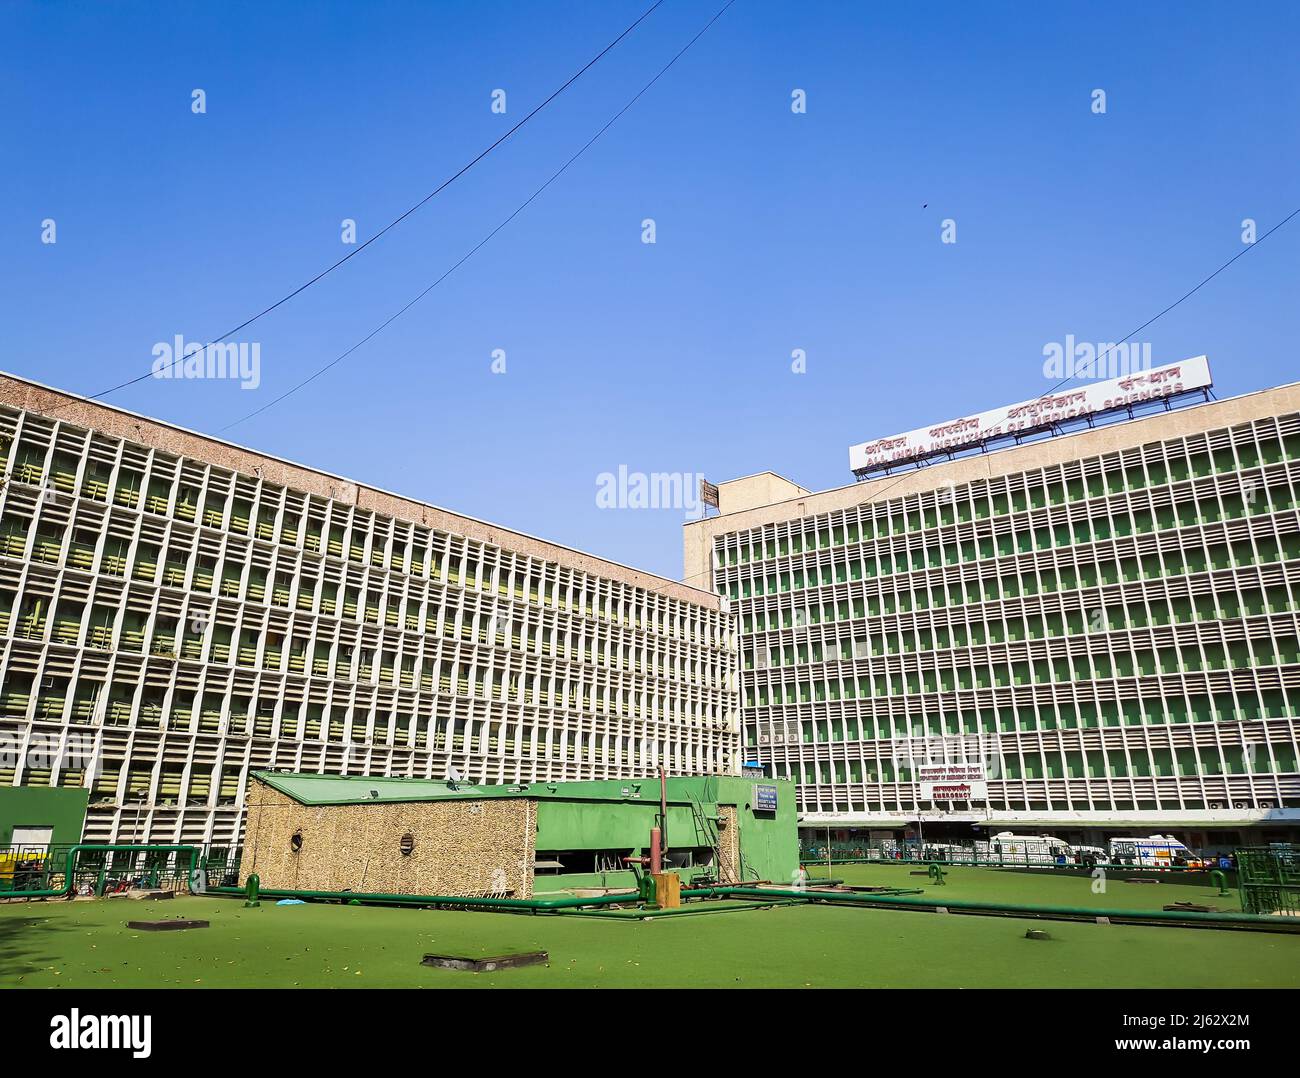 hospital multistory building with bright blue sky at morning image is taken at aiims delhi india on Apr 14 2022. Stock Photo